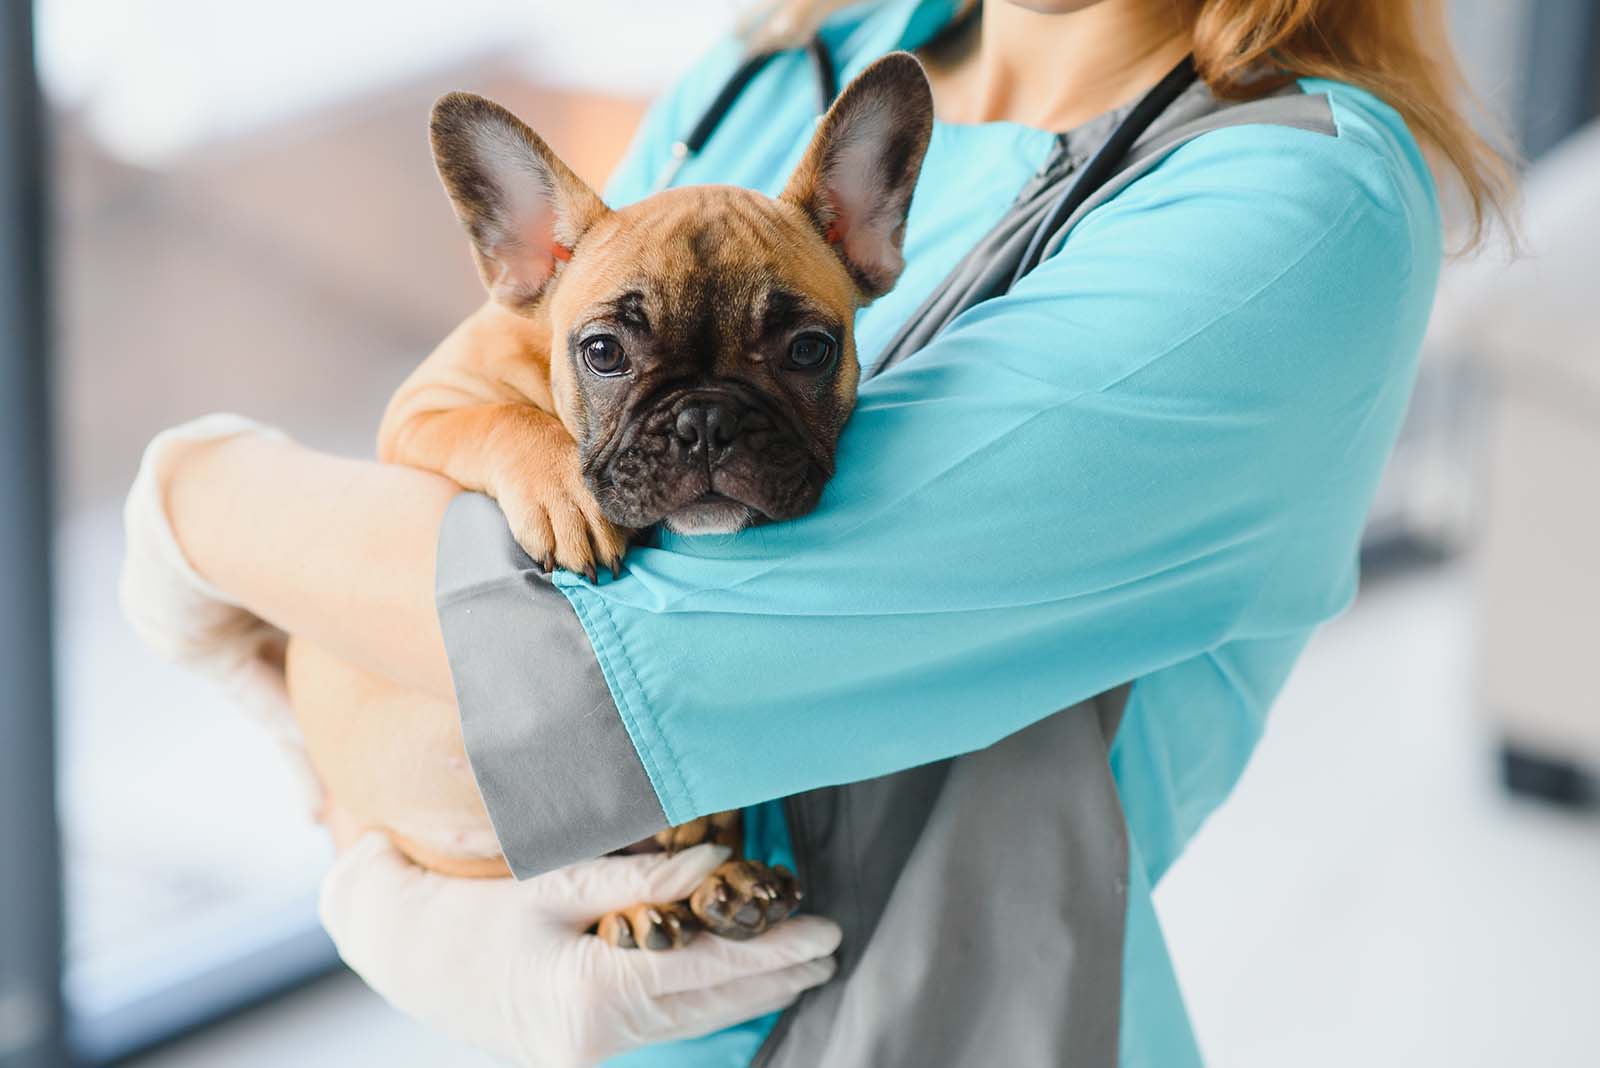 Doctor carrying a dog